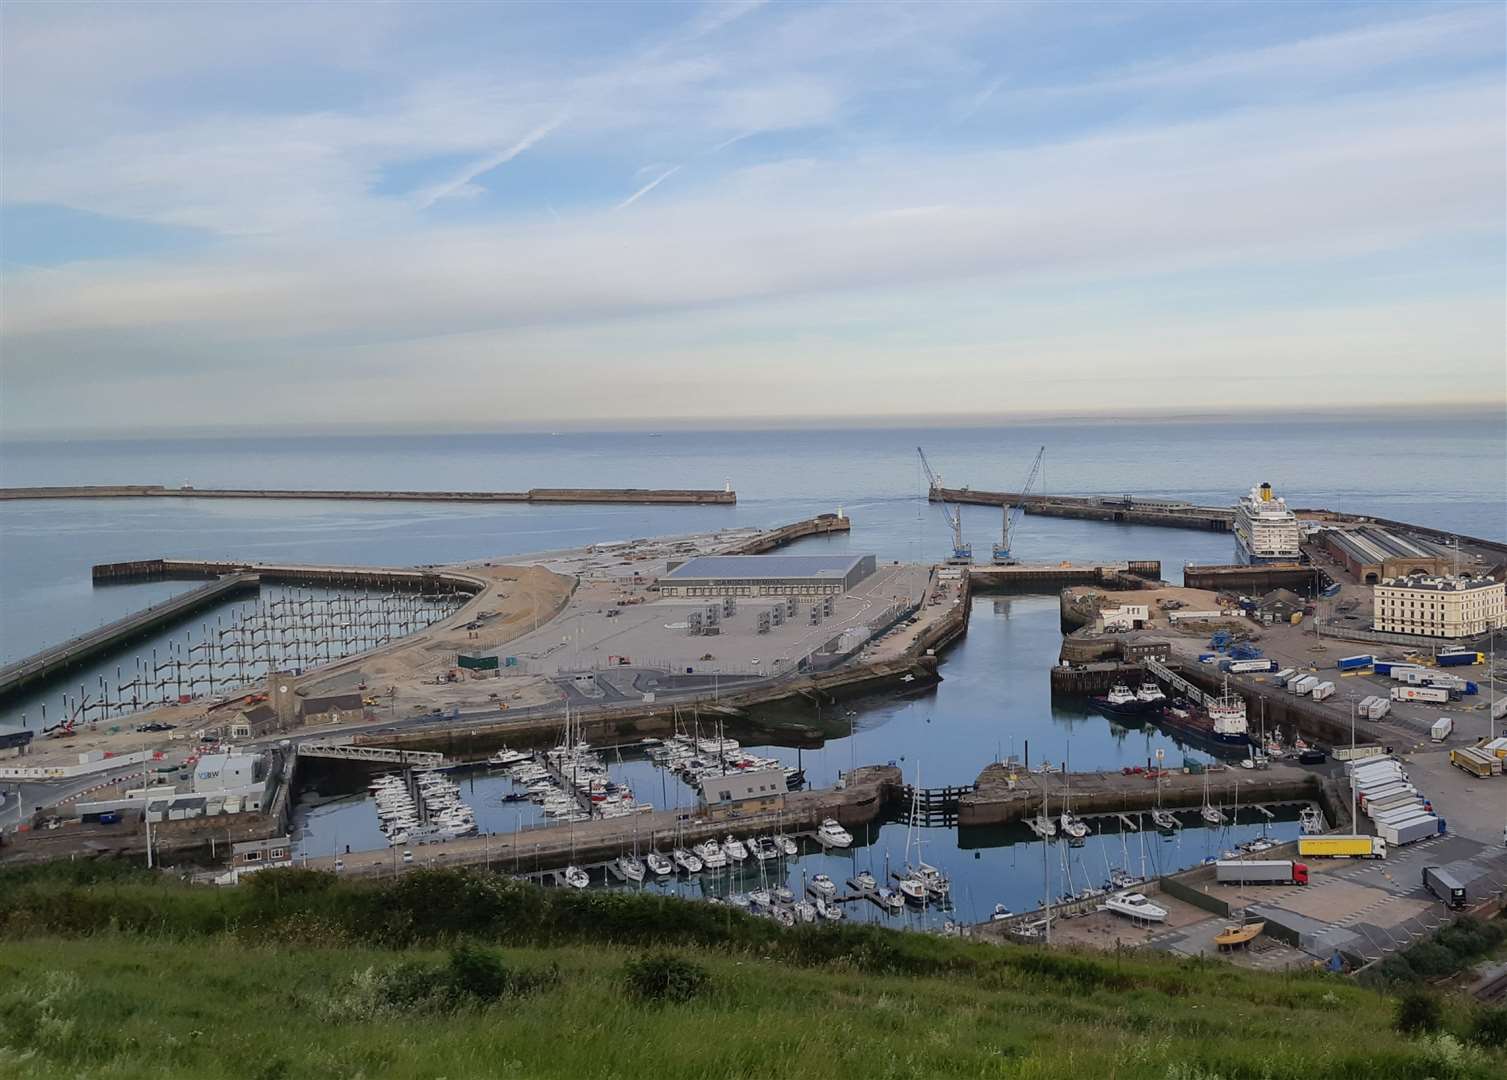 The continuing progress on the Dover Western Docks Revival, as shown early this month. Admiralty Pier is on the right behind Lord Warden House and Cruise Terminal 1